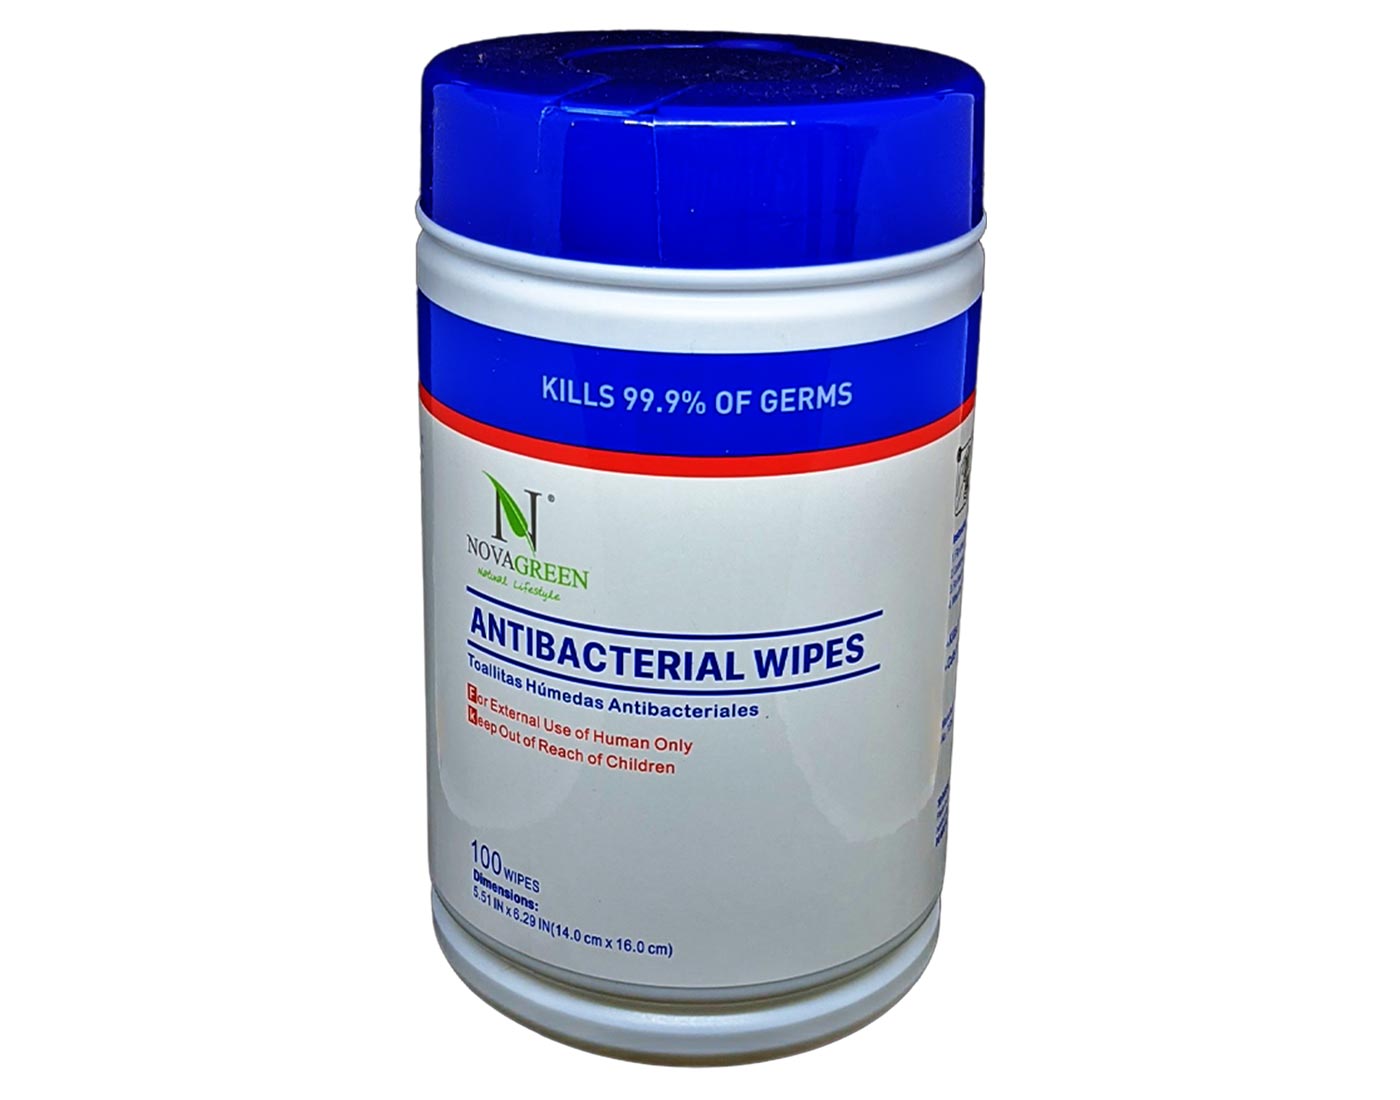 Nova Green wet wipes. These antibacterial wipes are great for hand sanitizing. But hand sanitizer online at Hype Labs.